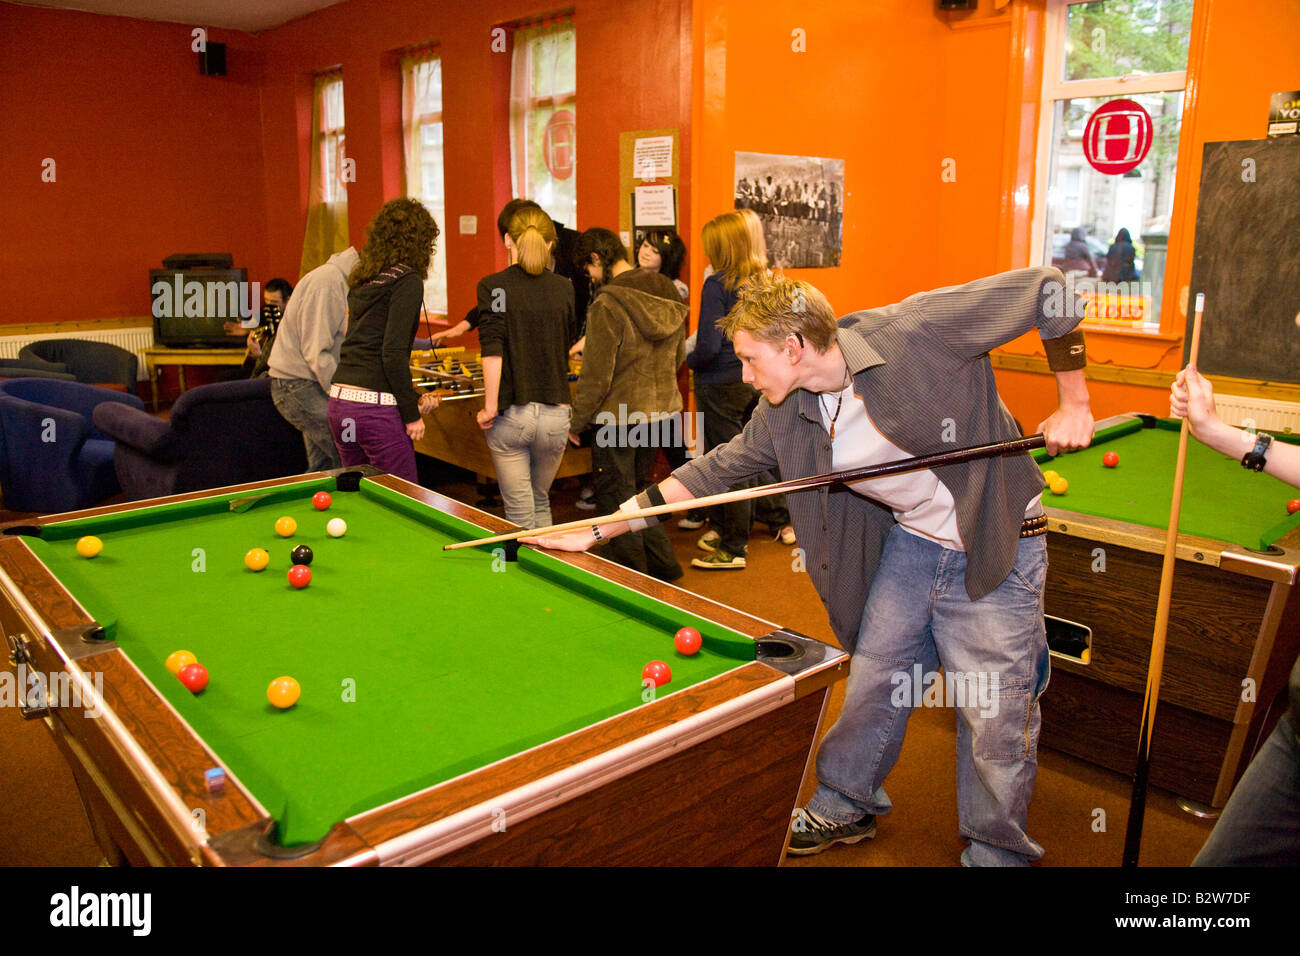 playing 8 ball pool in a youth centre Stock Photo